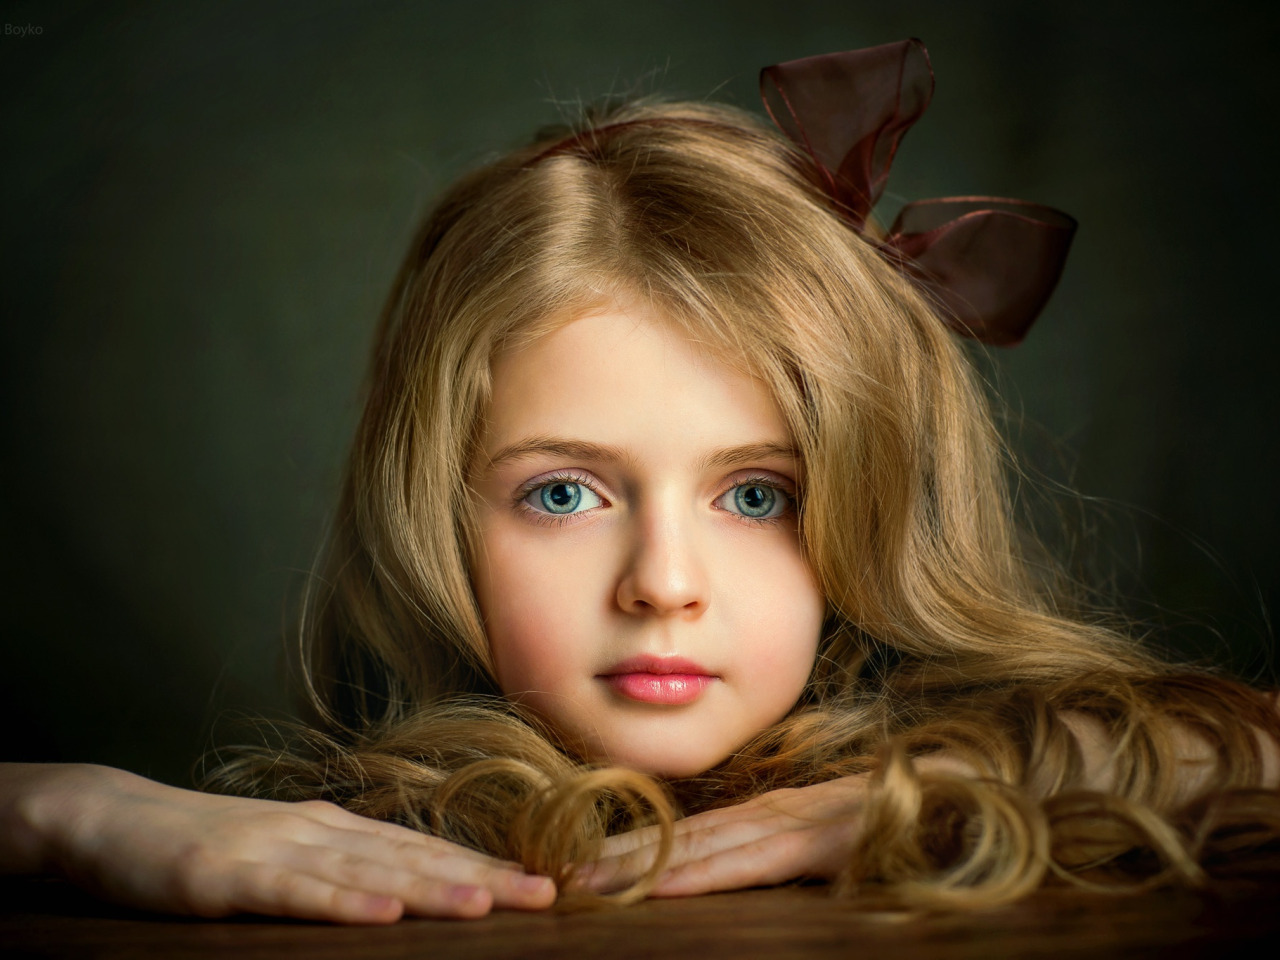 Download wallpaper eyes, face, hair, girl, bow, section miscellanea in reso...